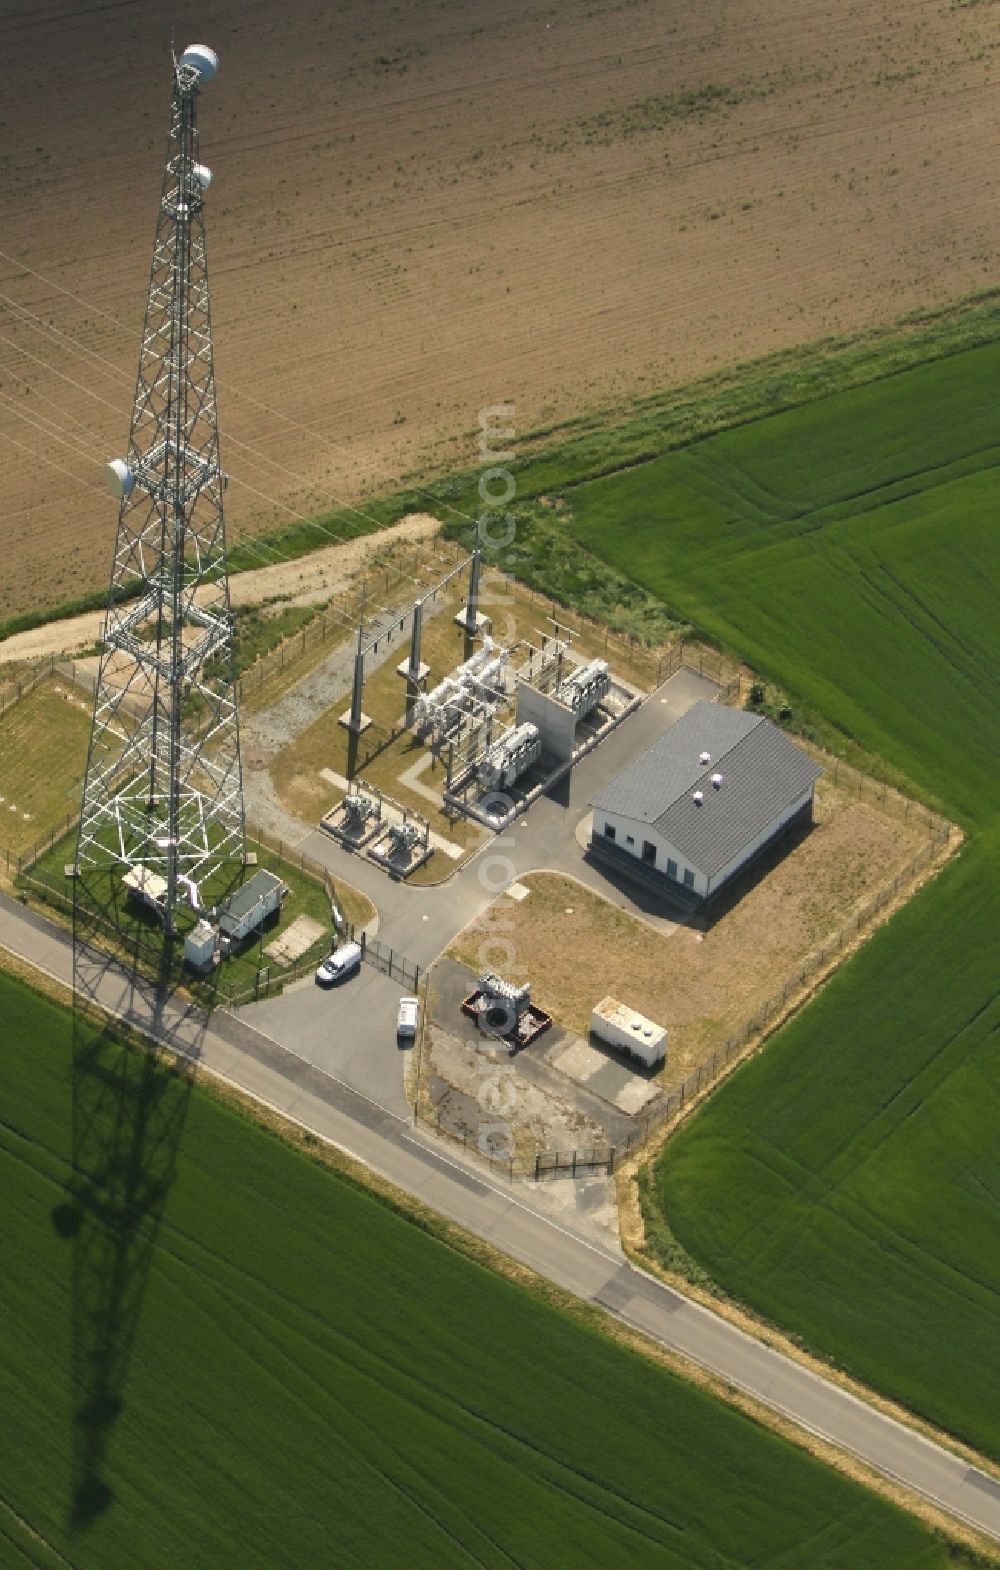 Aerial image Ebeleben - Site of the substation for voltage conversion and electrical power supply on Rockstedter Strasse in Ebeleben in the state Thuringia, Germany